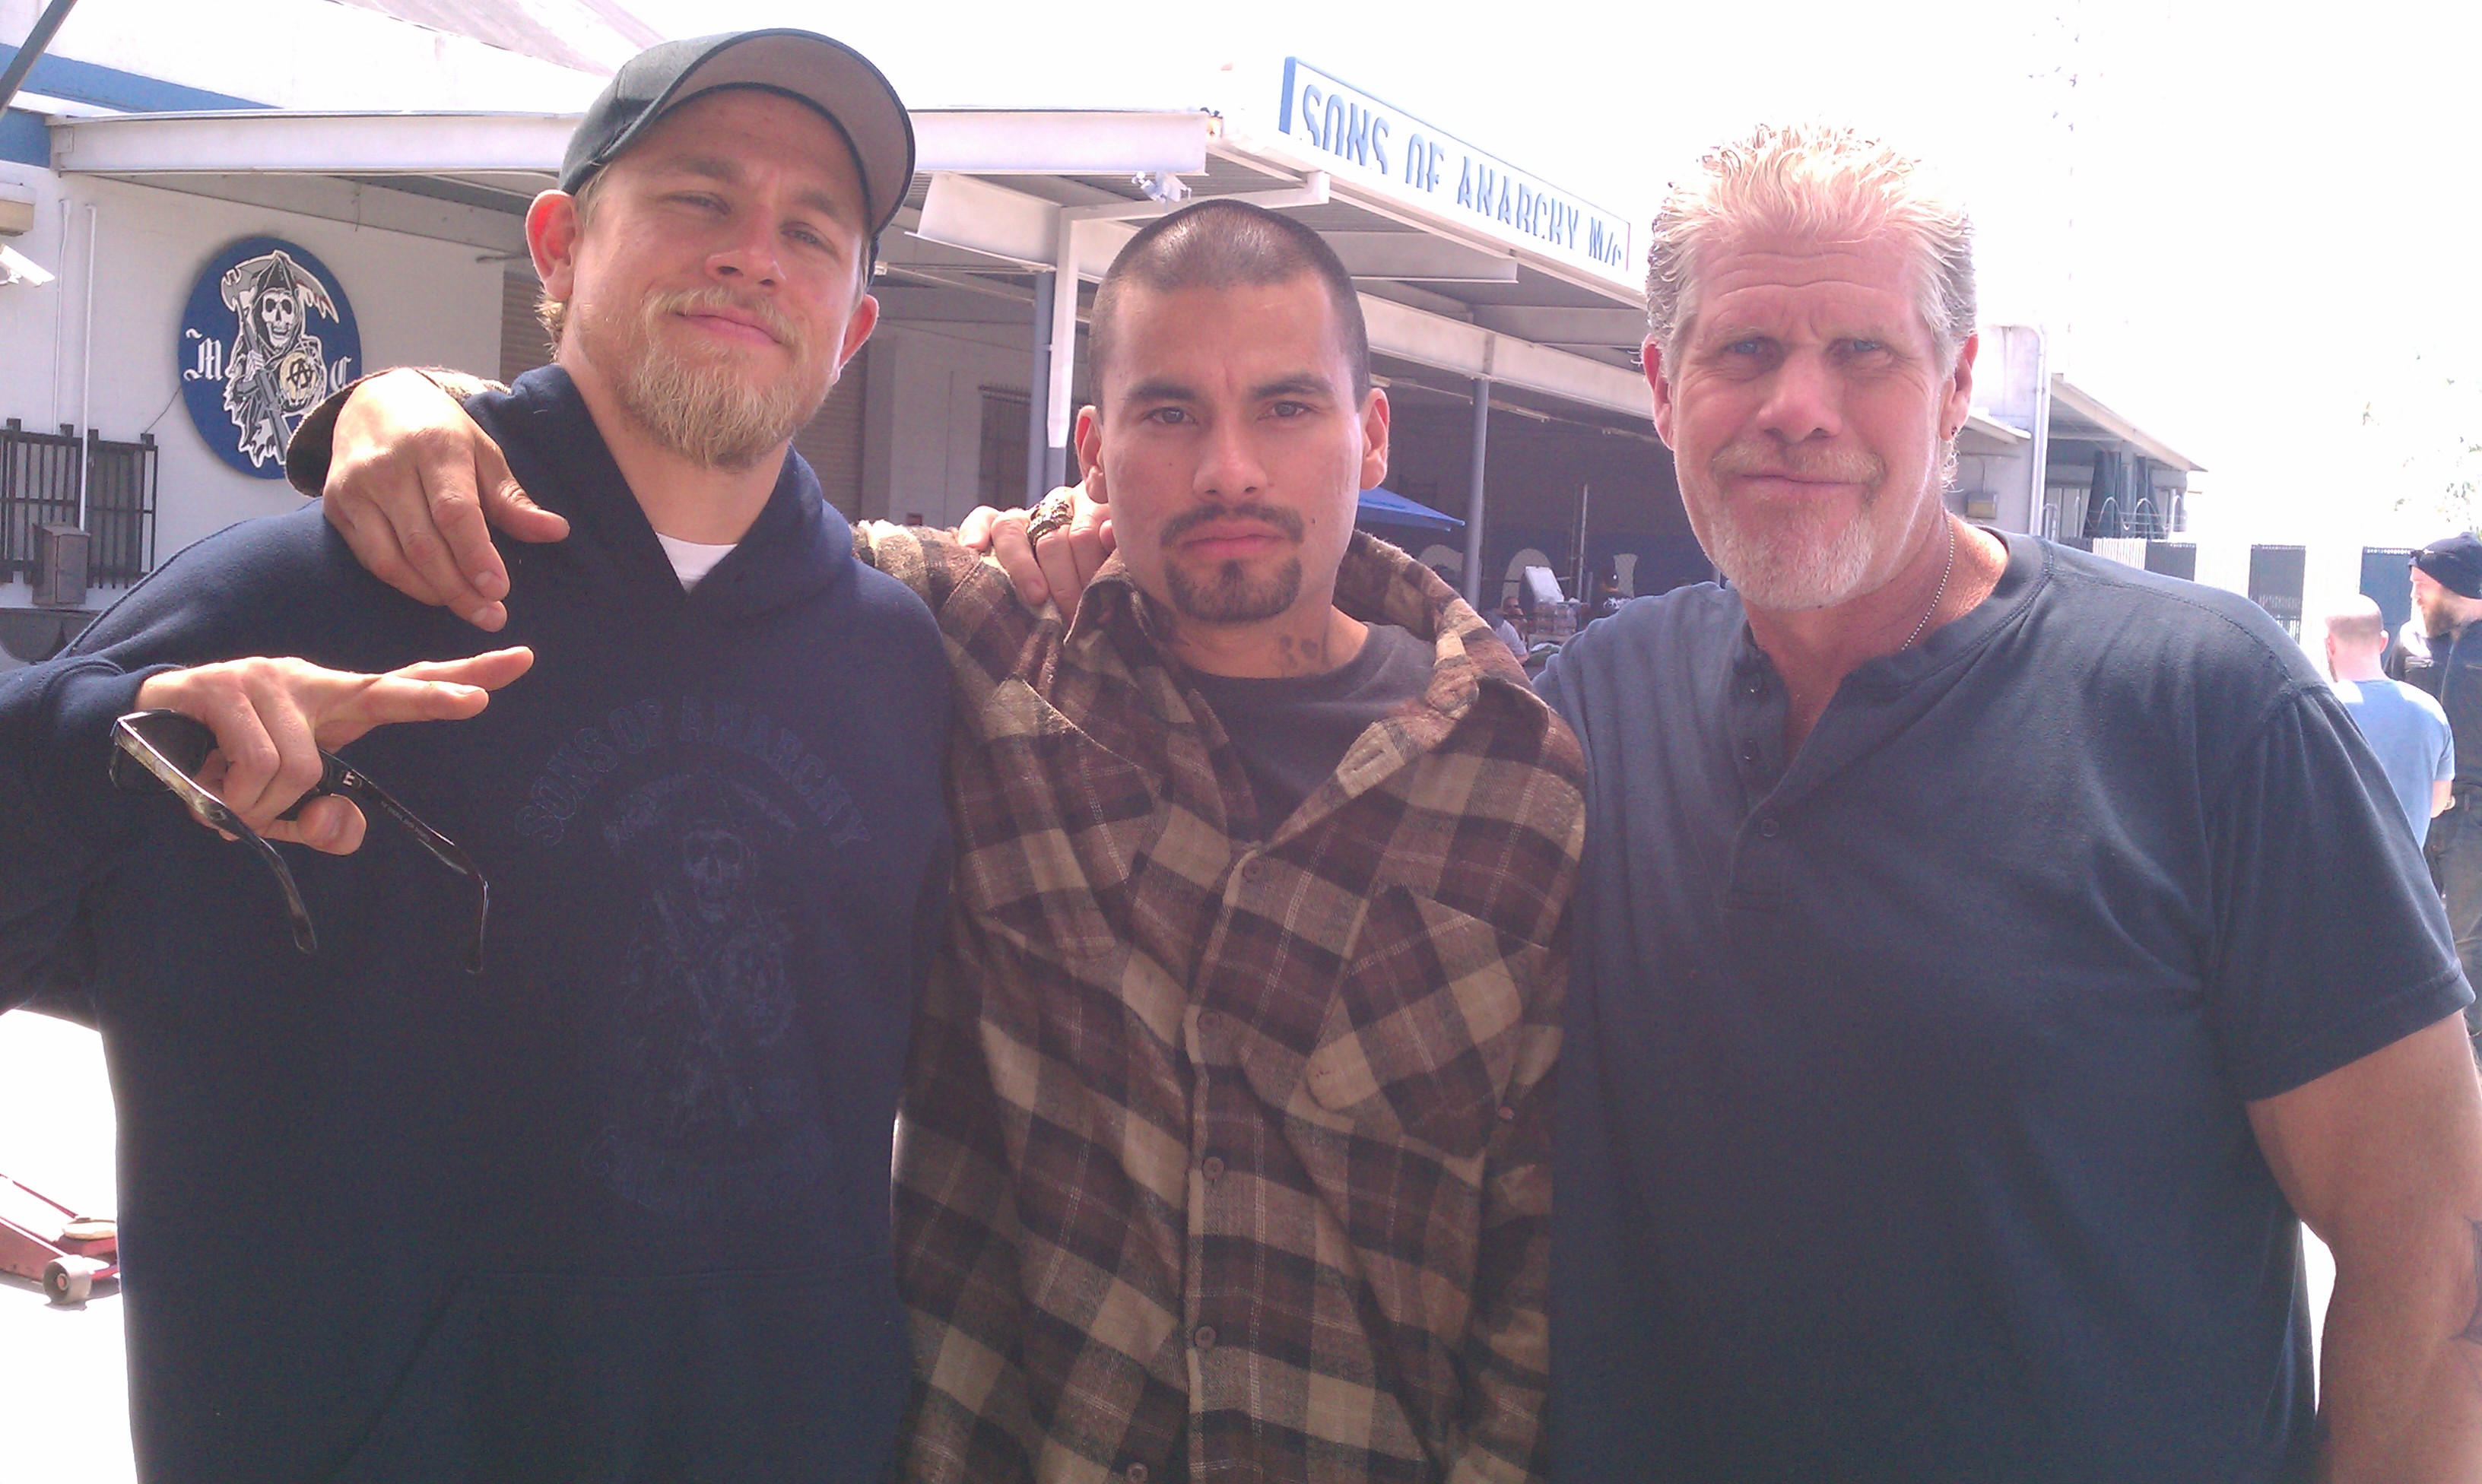 Charlie Hunnam, Daniel Moncada and Ron Perlman. Sons Of Anarchy